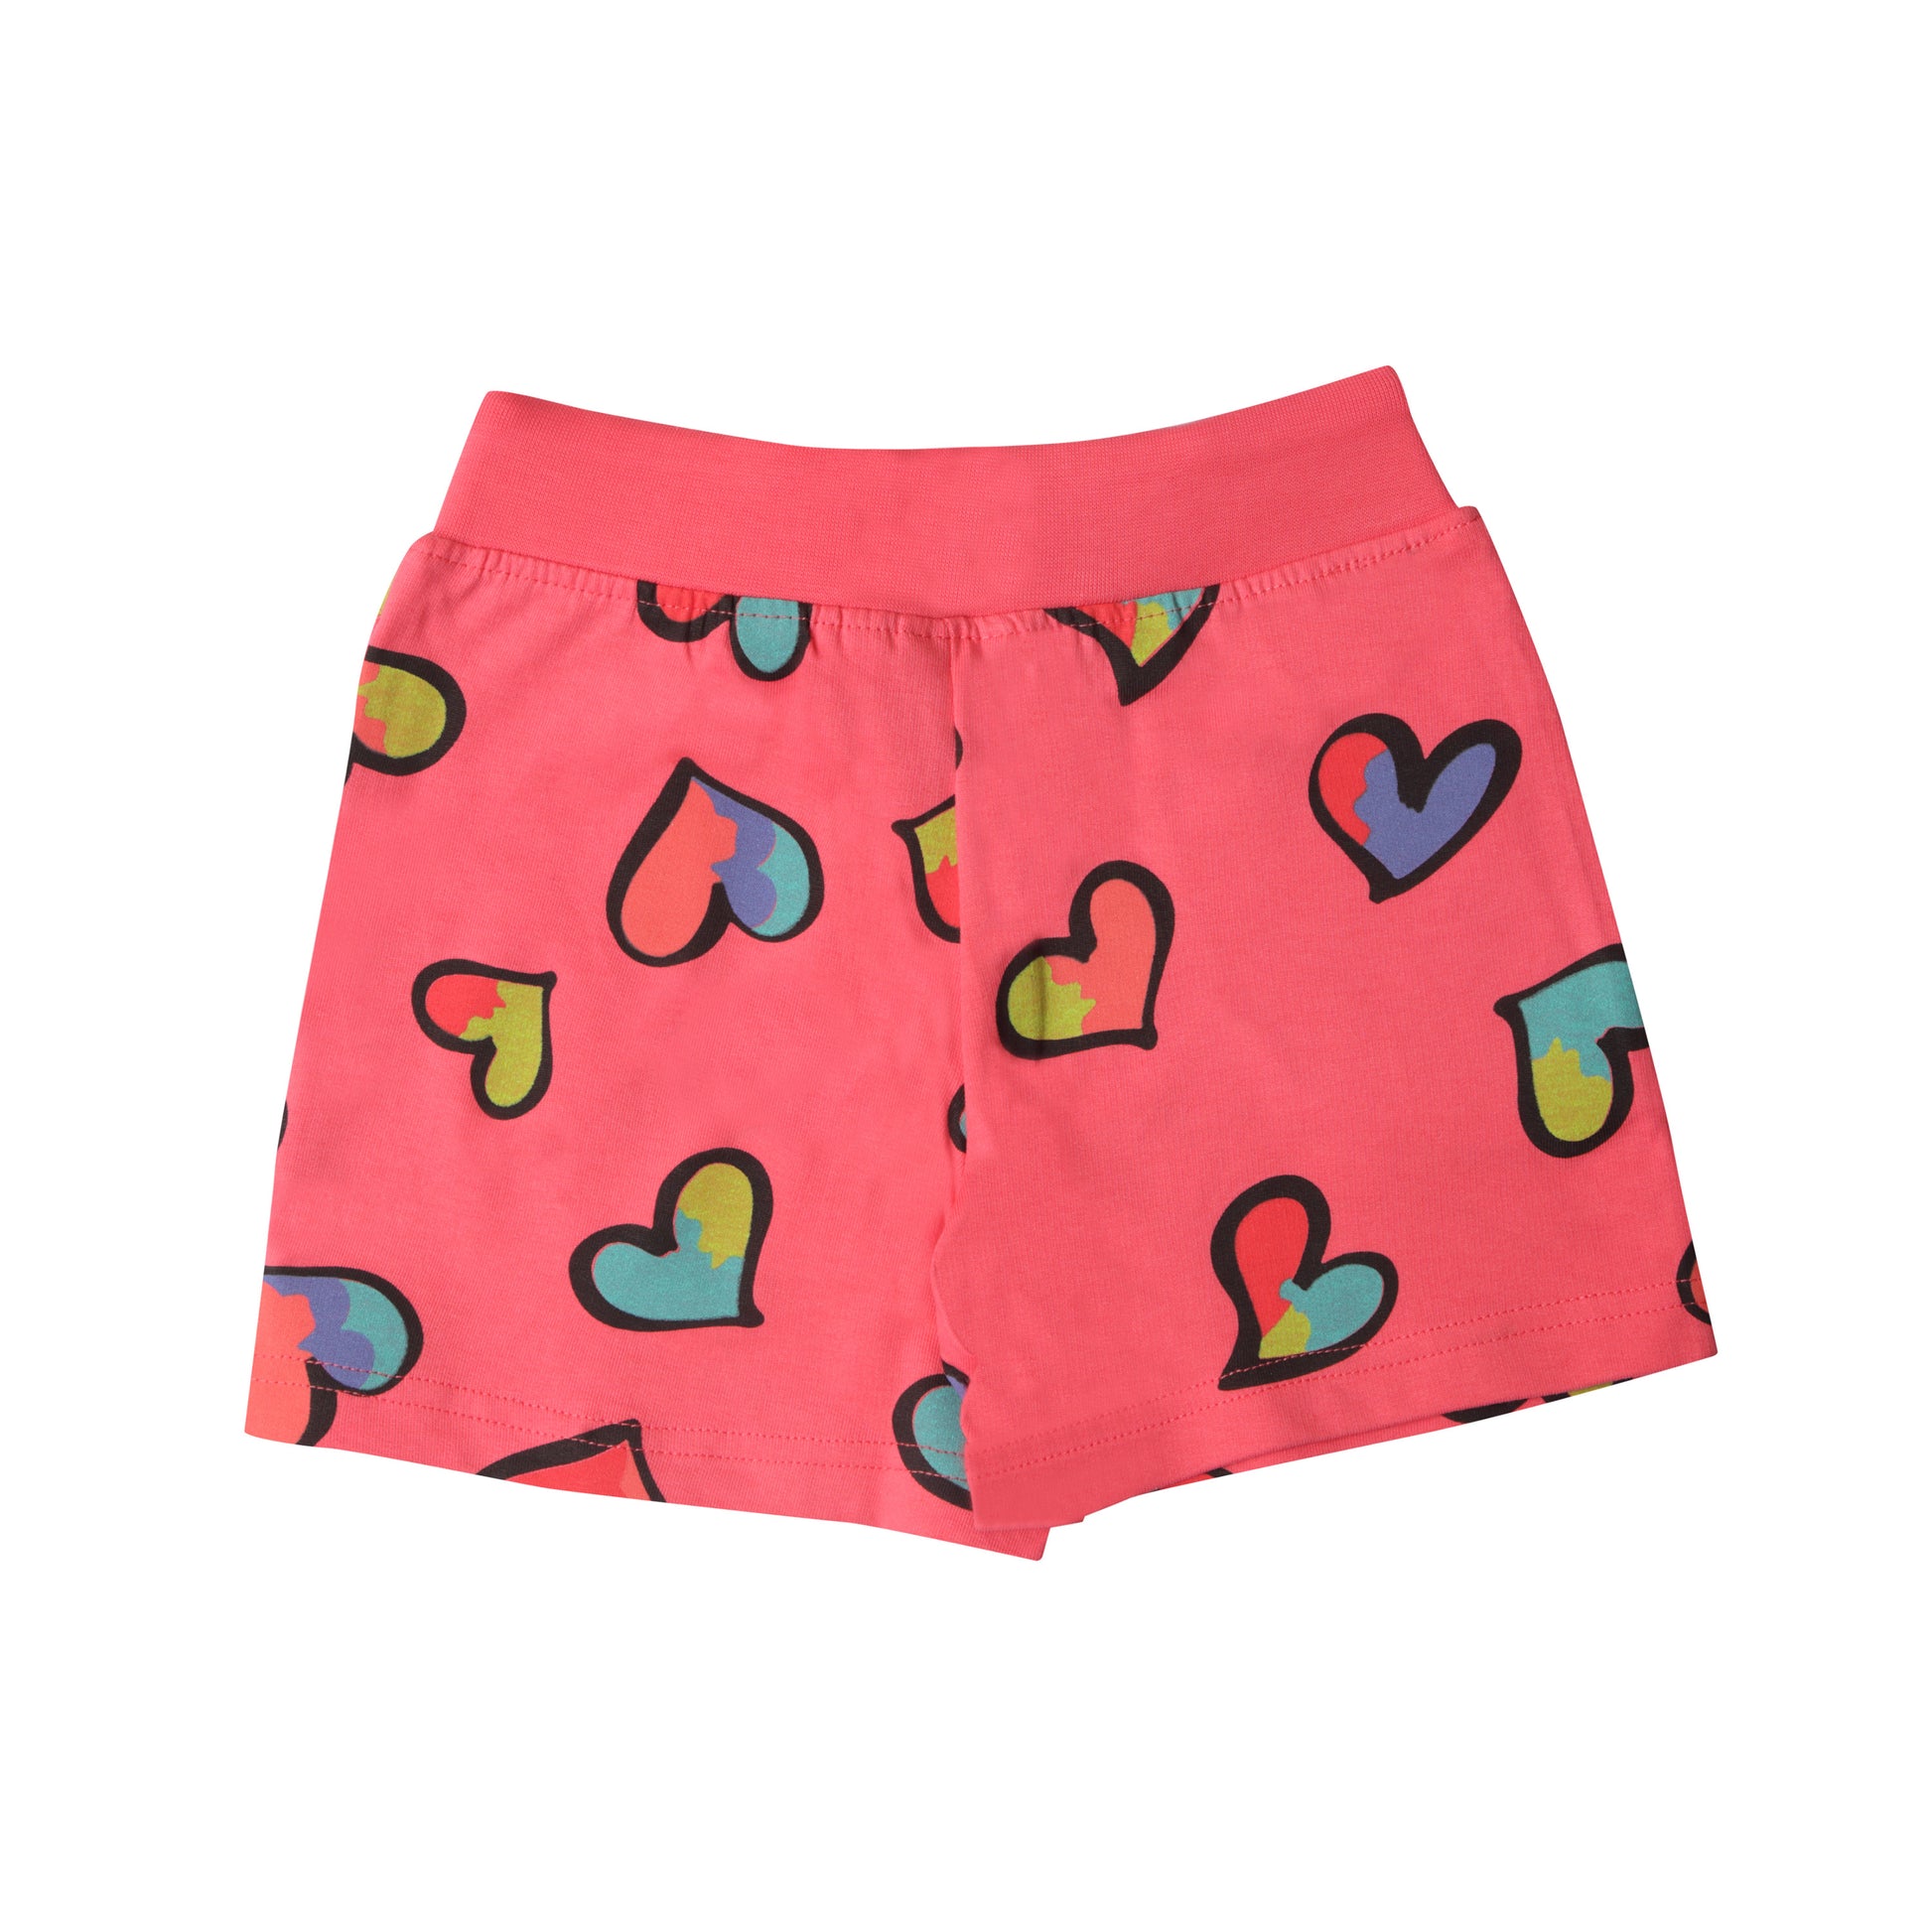 Tomato Red Shorts Heart Printed Regular Fit